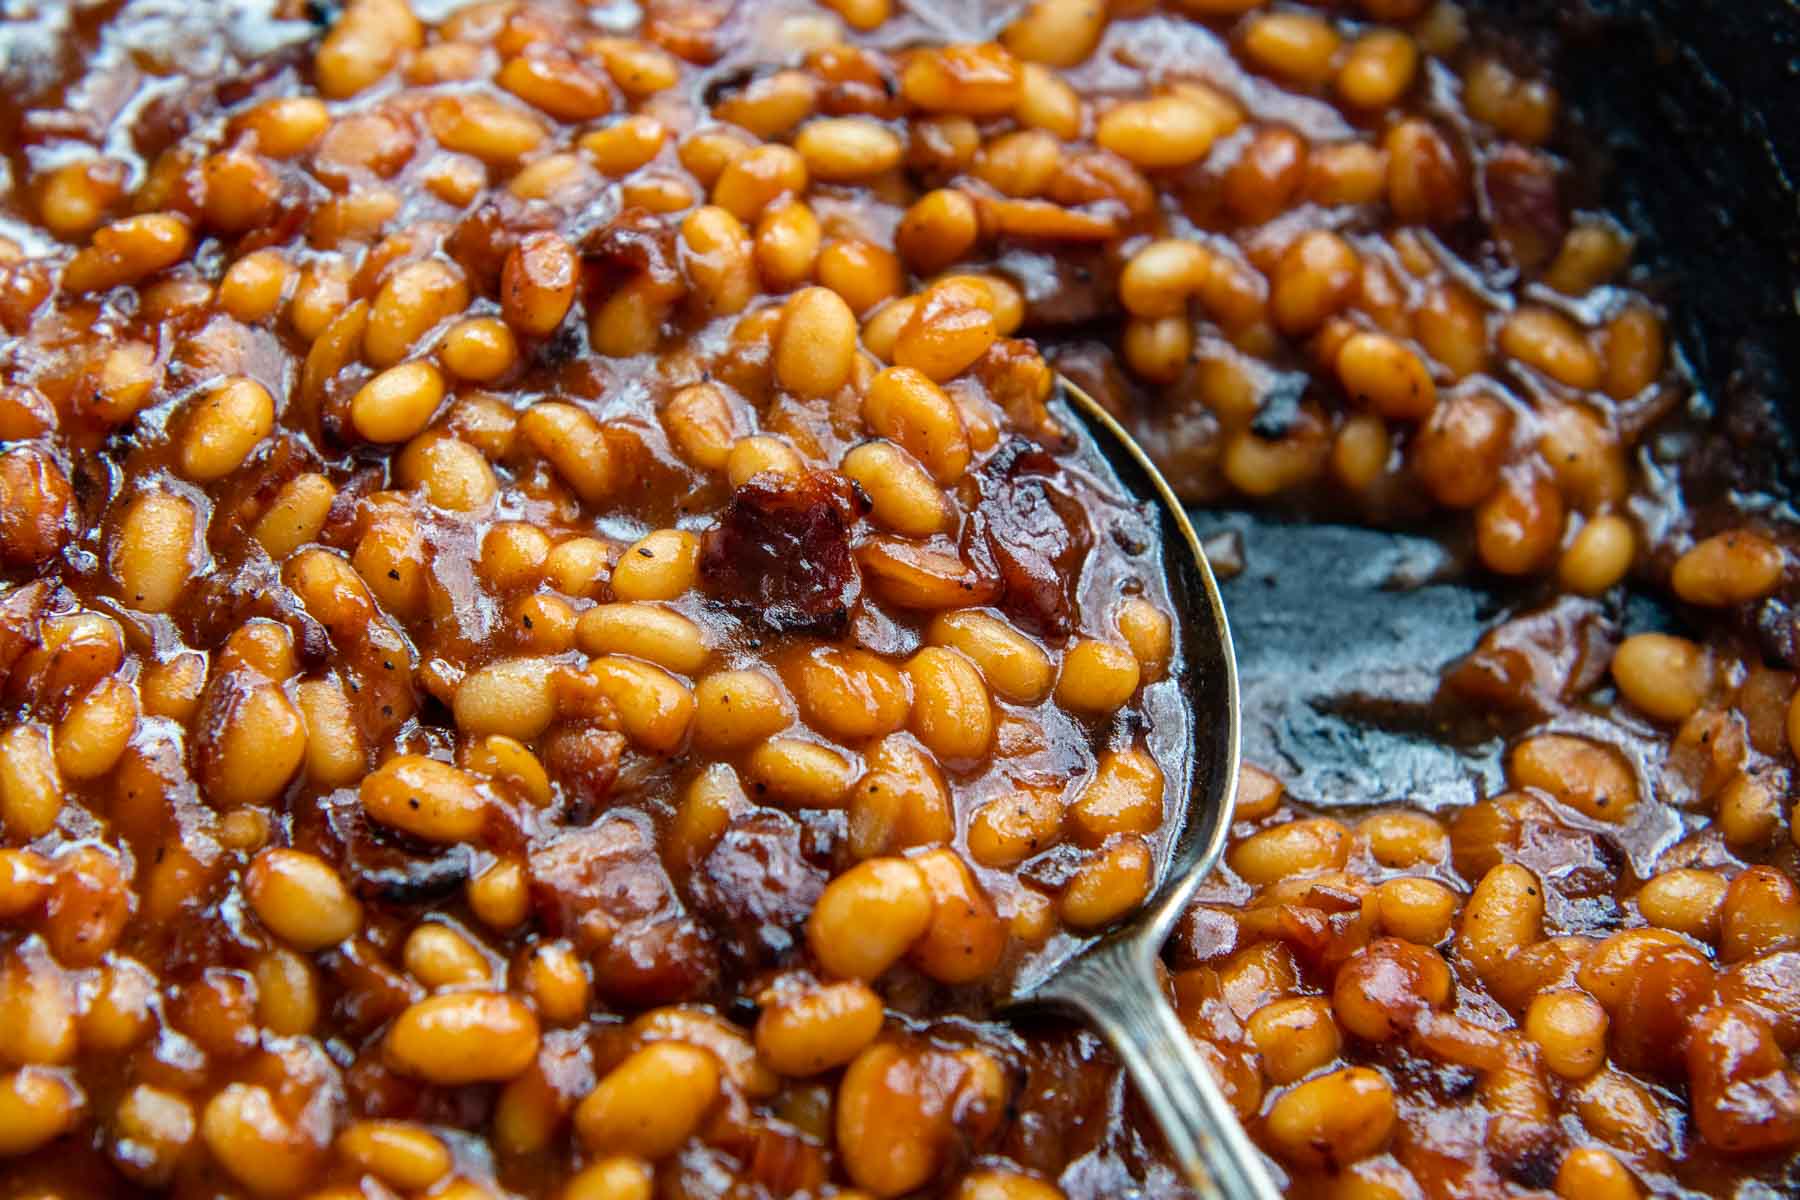 another image of a spoon lifting up baked beans.